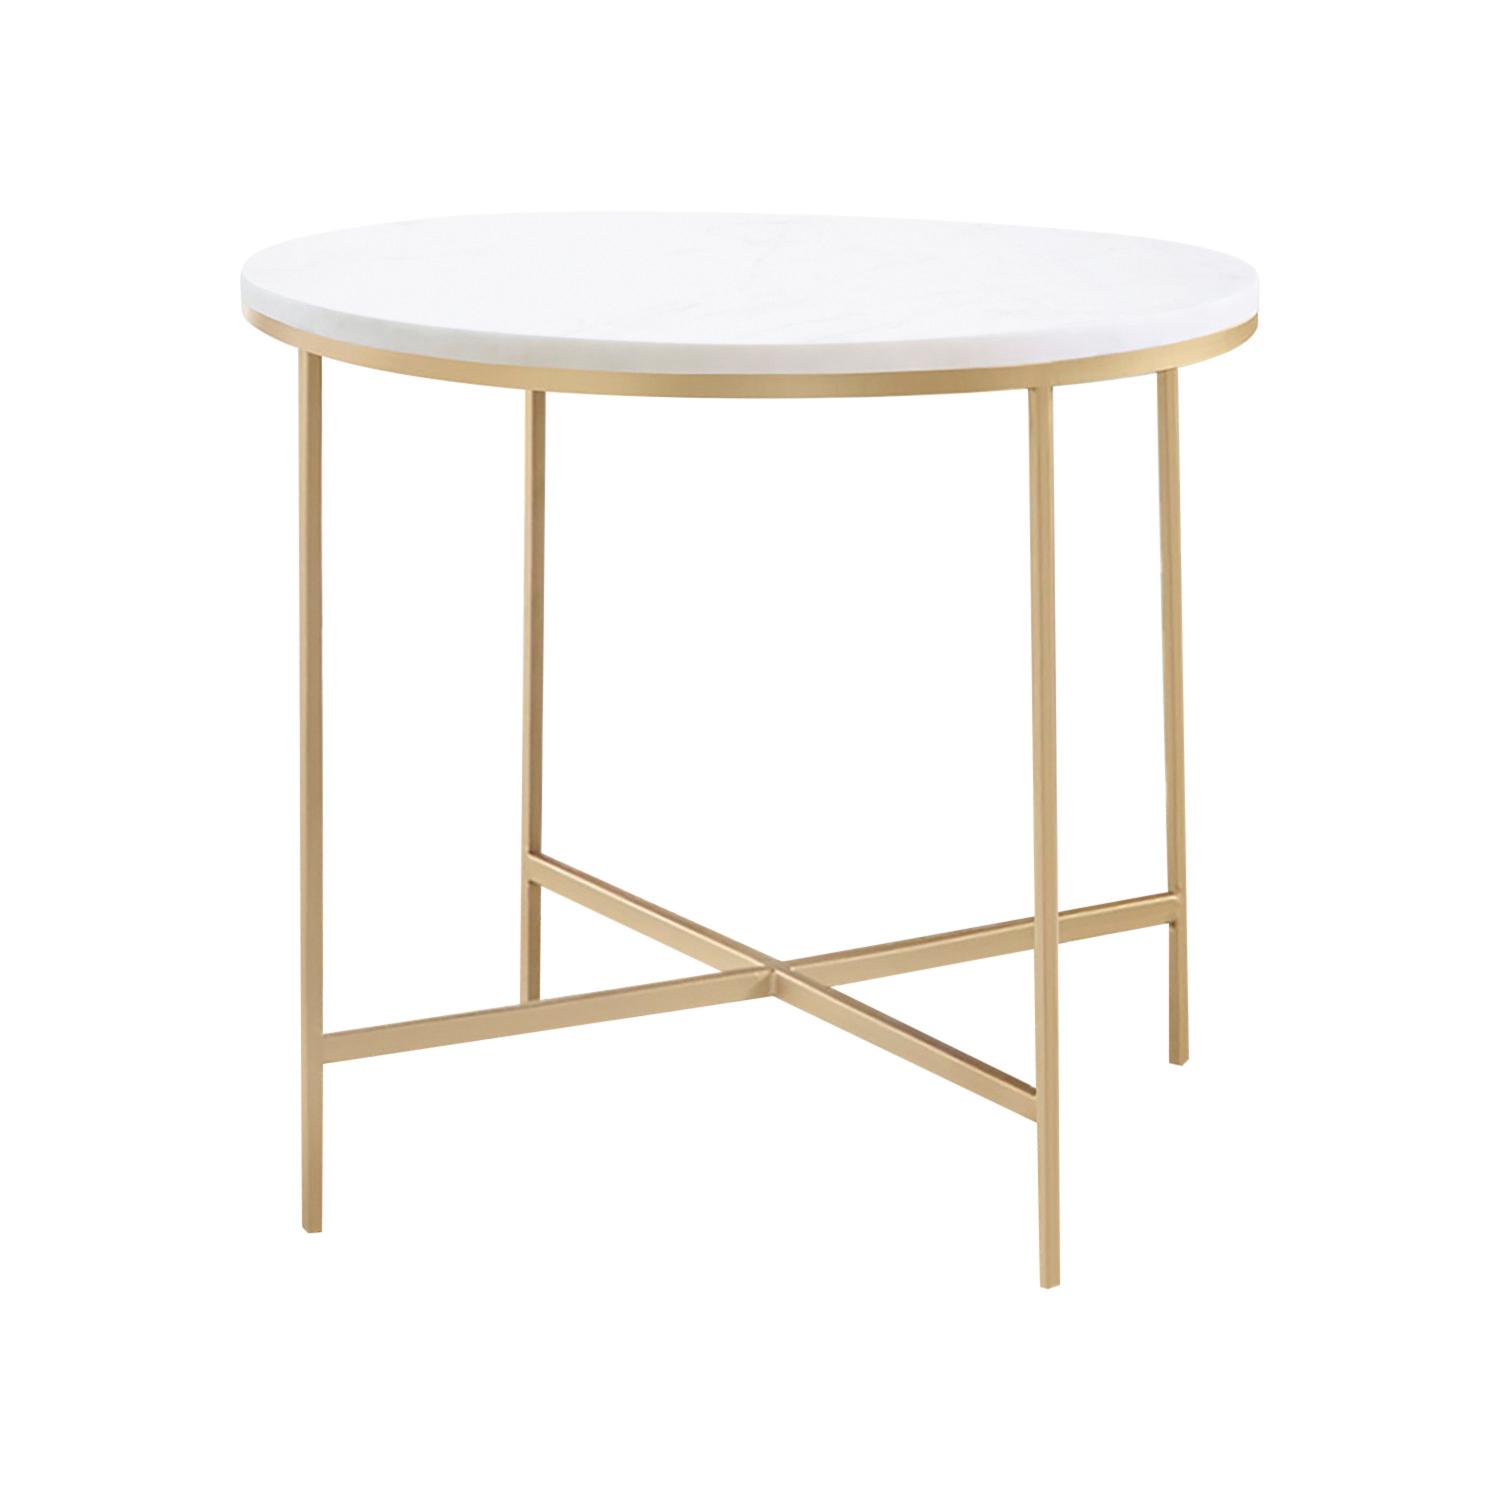 Contemporary End Table 723207 723207 in White, Gold 